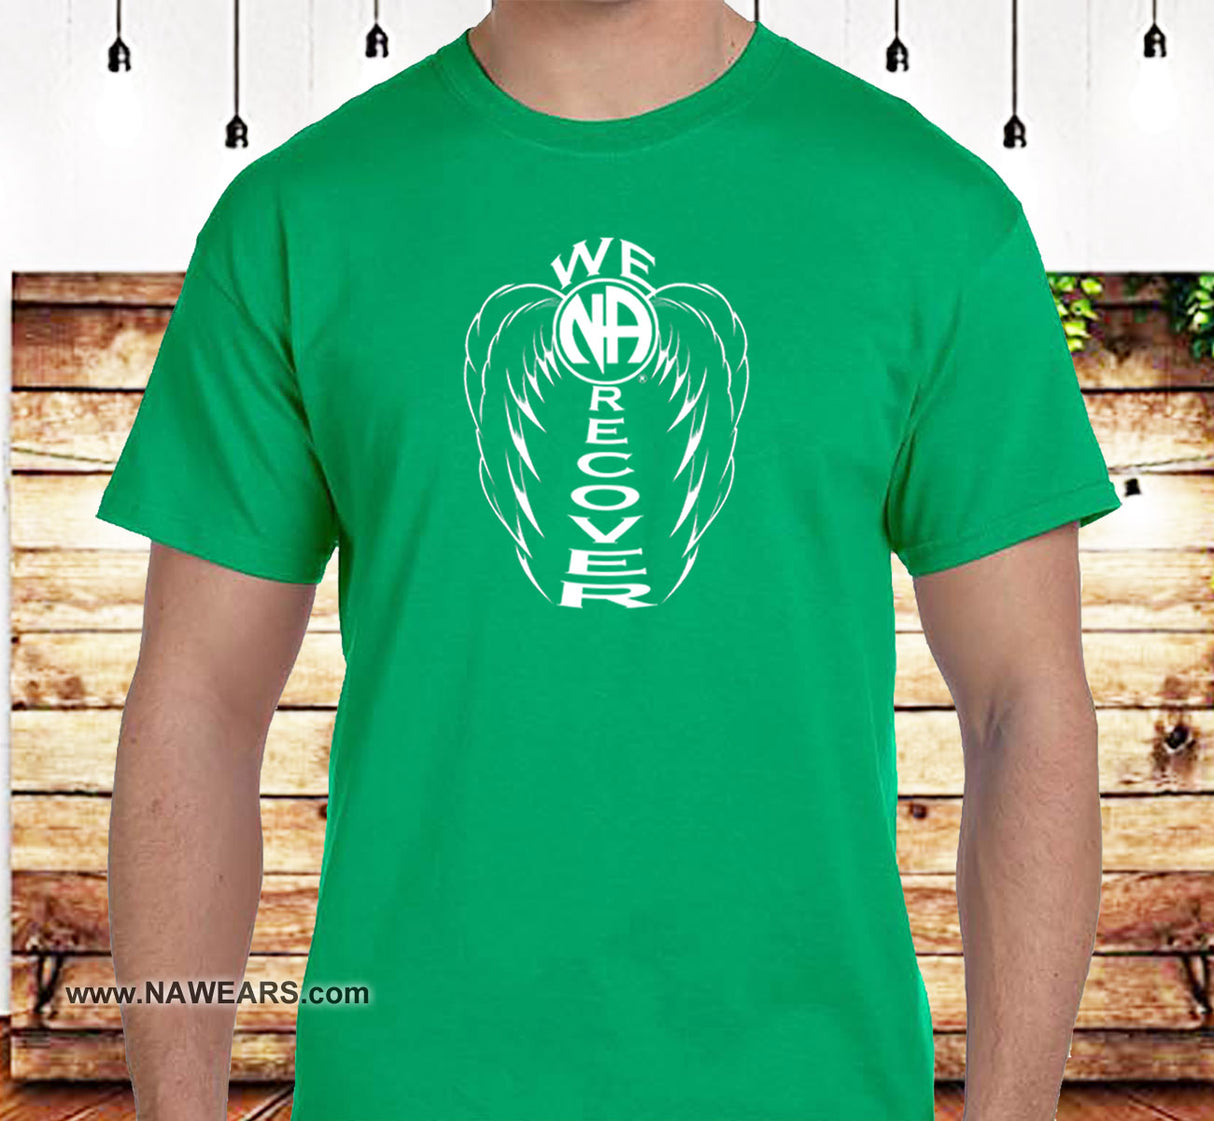 We Do Recover  Wings Tee